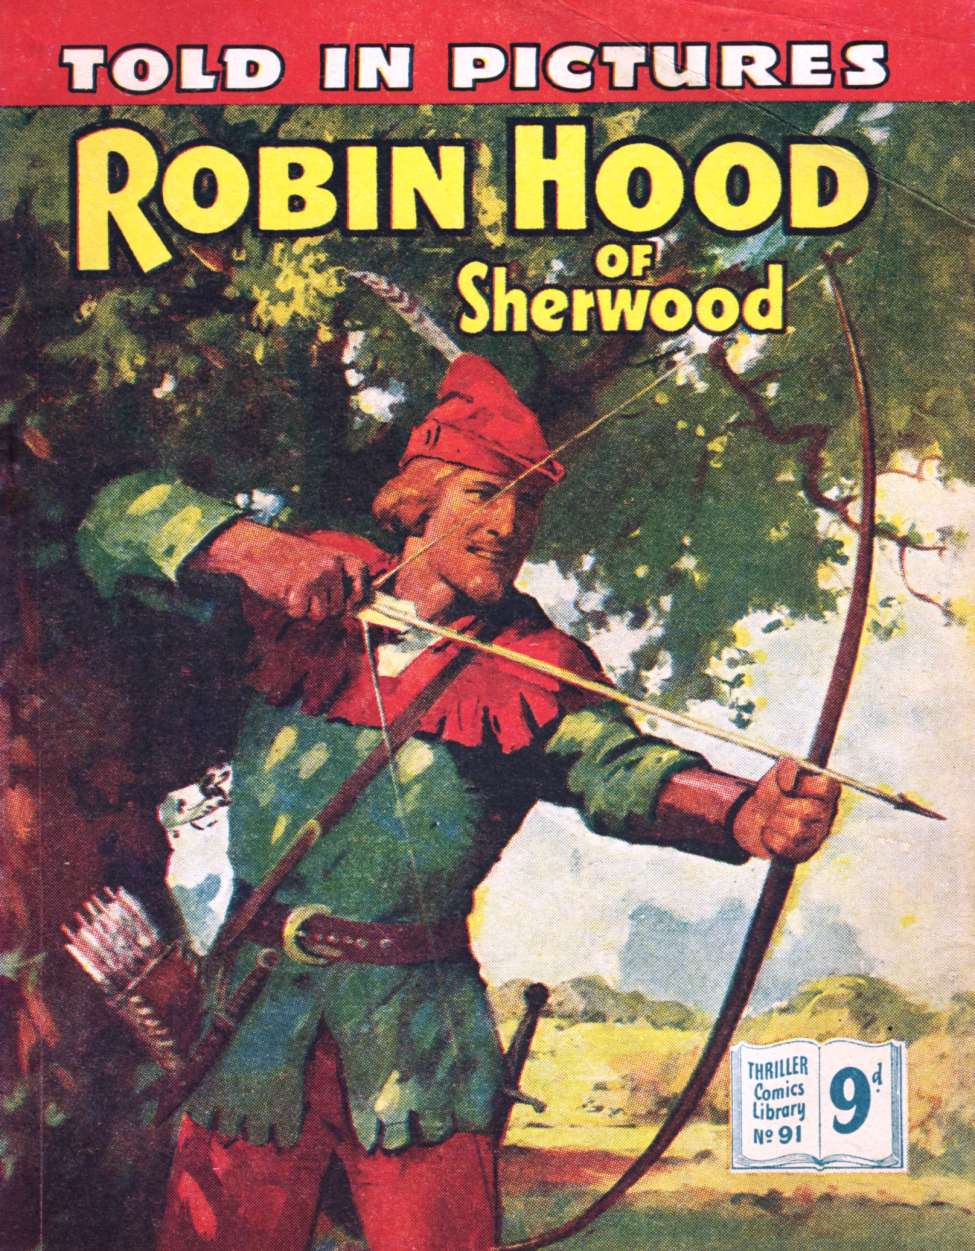 Book Cover For Thriller Comics Library 91 - Robin Hood of Sherwood